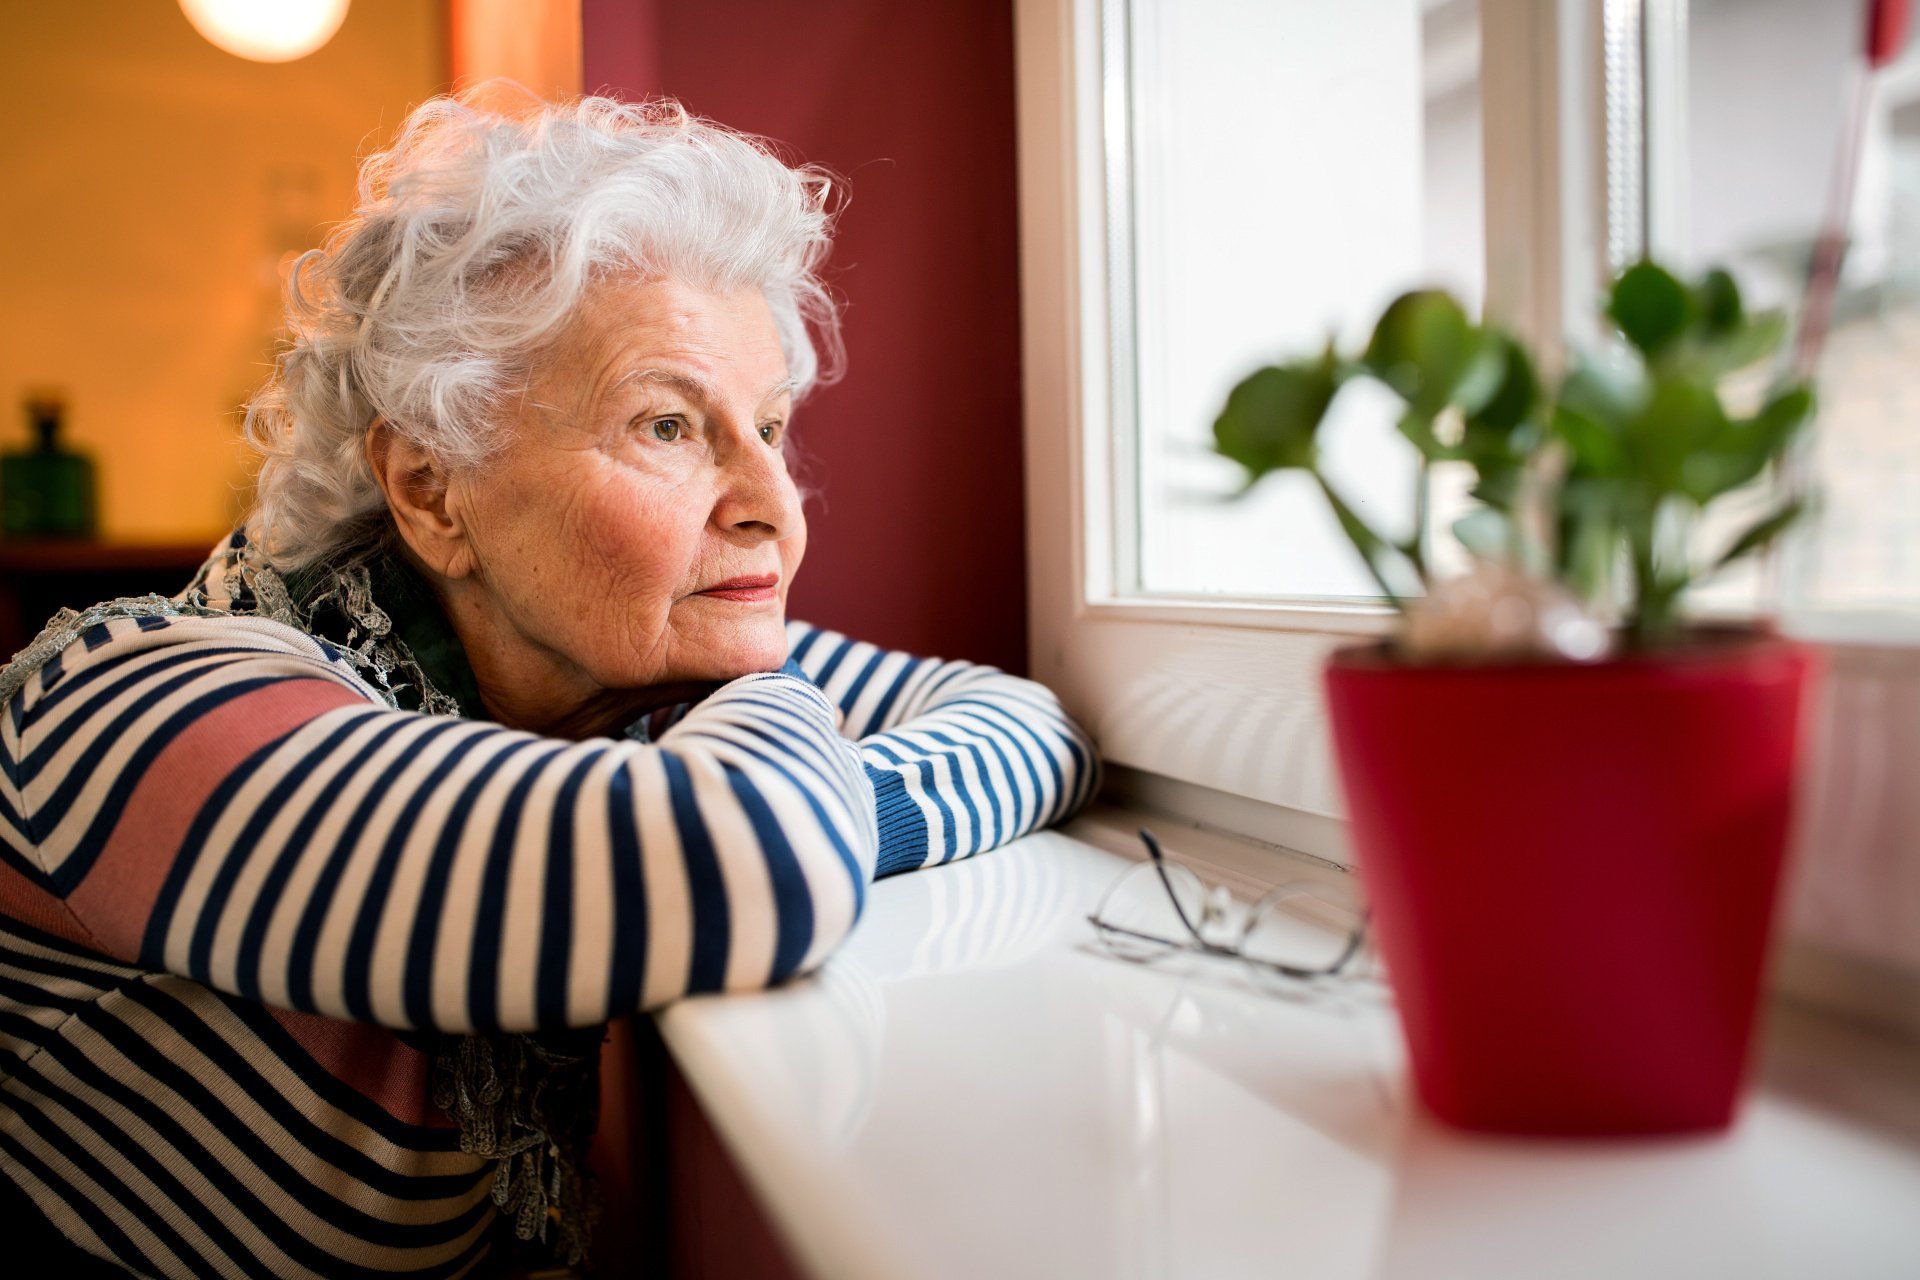 an elderly woman is leaning on a window sill looking out the window .